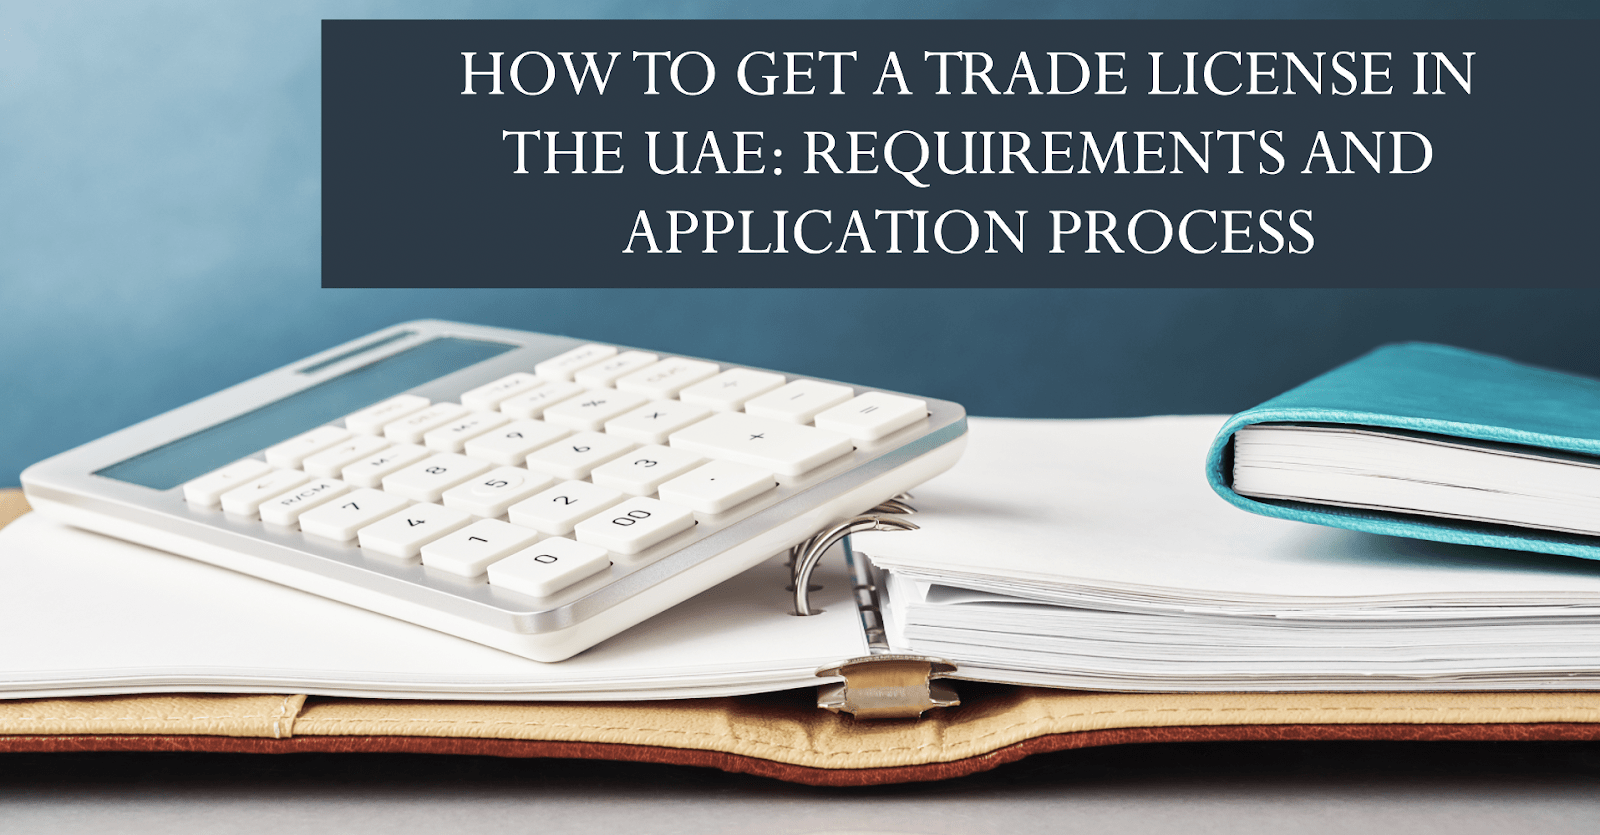 How to Get a Trade License in Dubai?